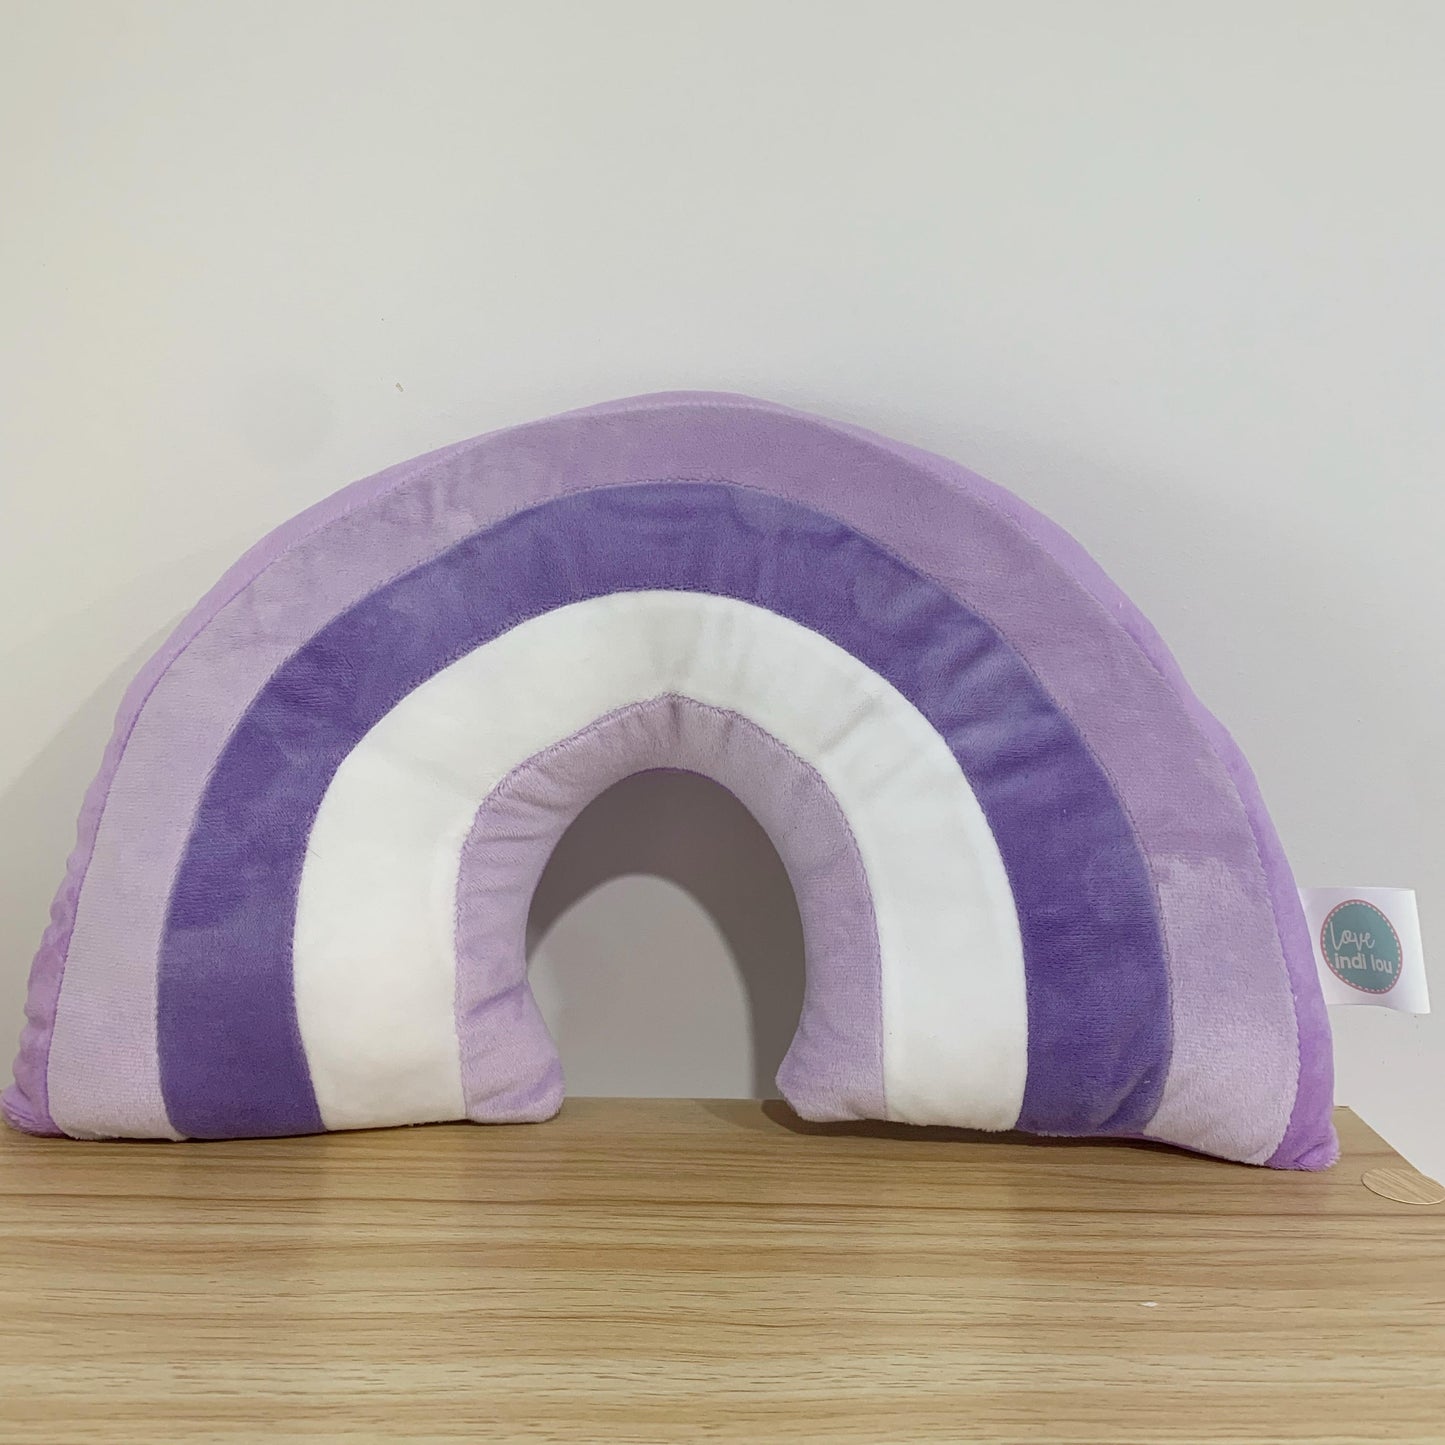 Rainbow Cushions - Buy One GET One HALF PRICE (no personalisation)